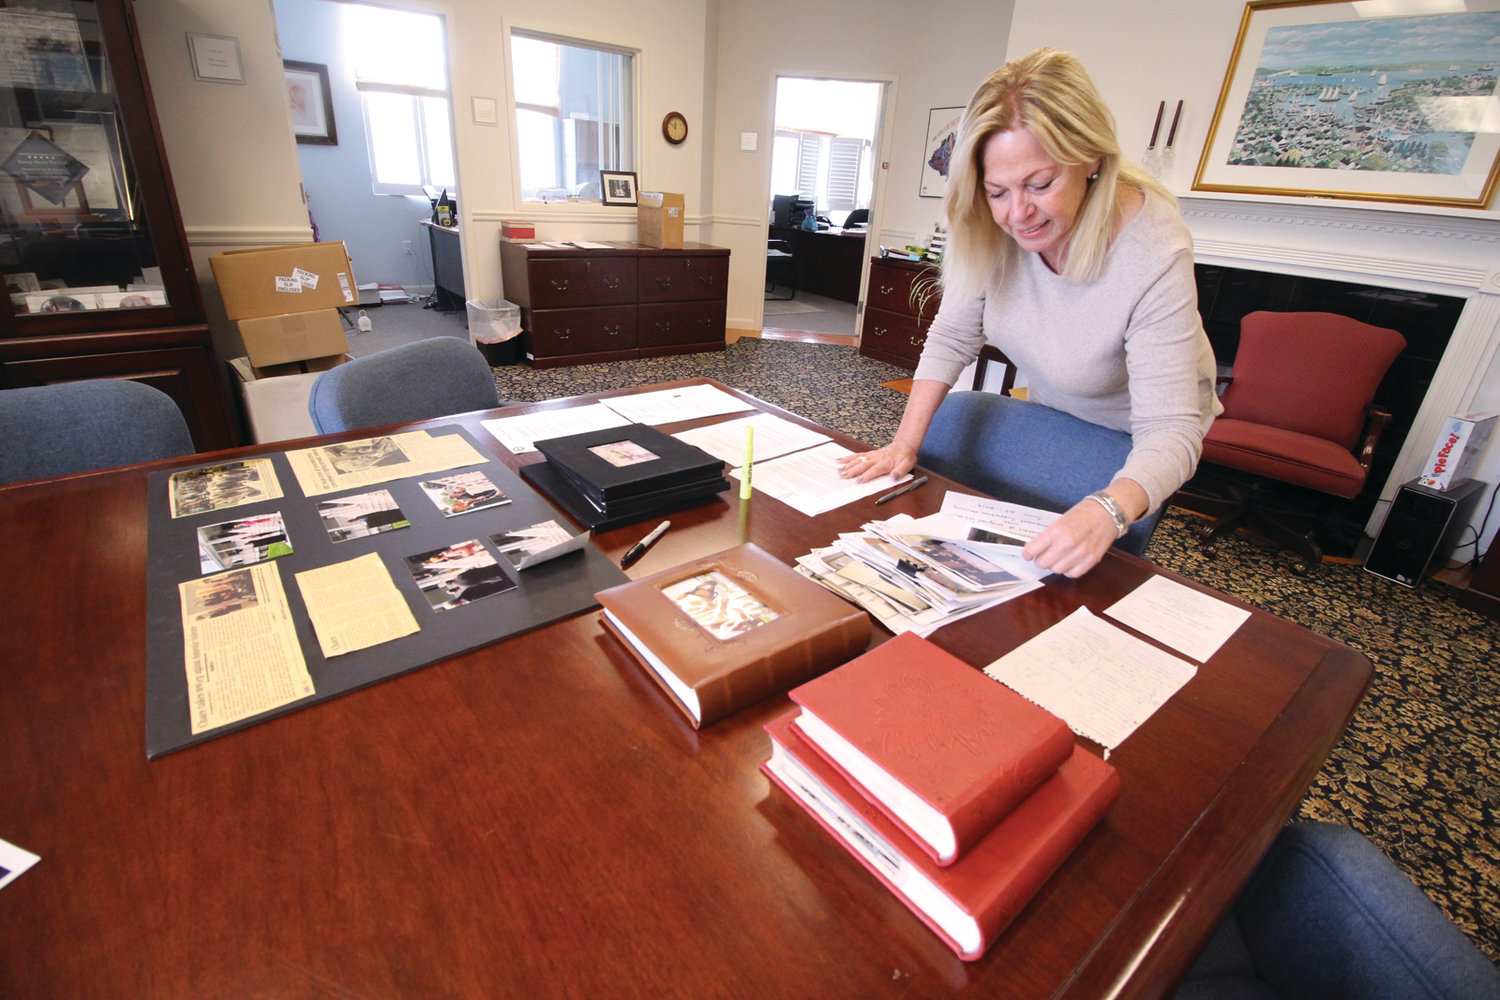 SO MANY ACHIEVEMENTS: Judith Earle, director of the Elizabeth Buffum Chace Center looks over photographs, newspaper clippings and letters documenting the history of the center founded 40 years ago.